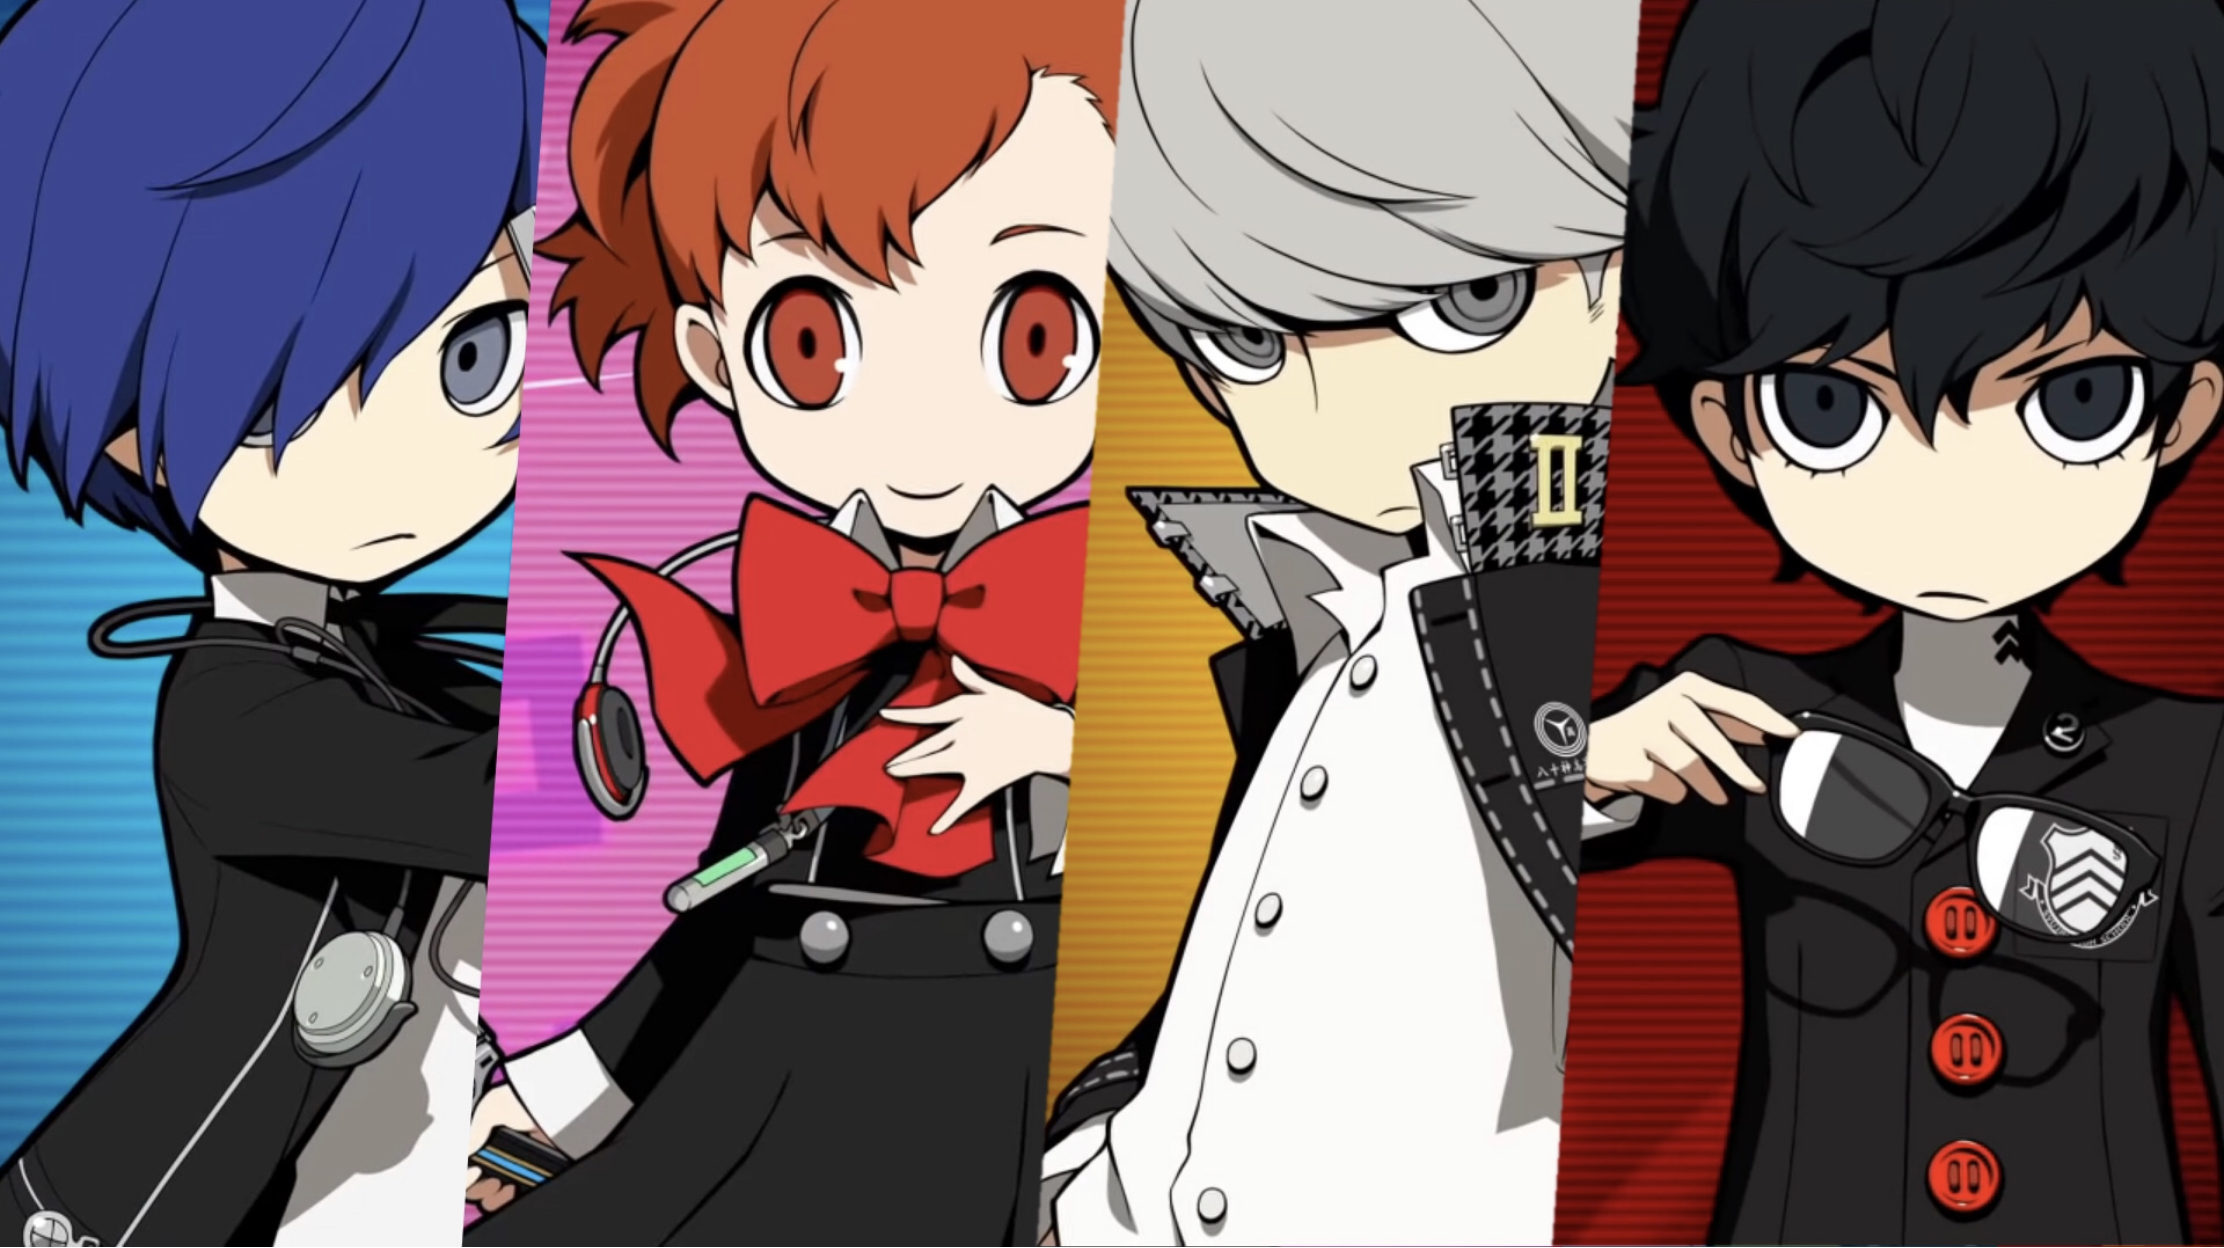  Things I Want to See Fixed in the Next Persona Game